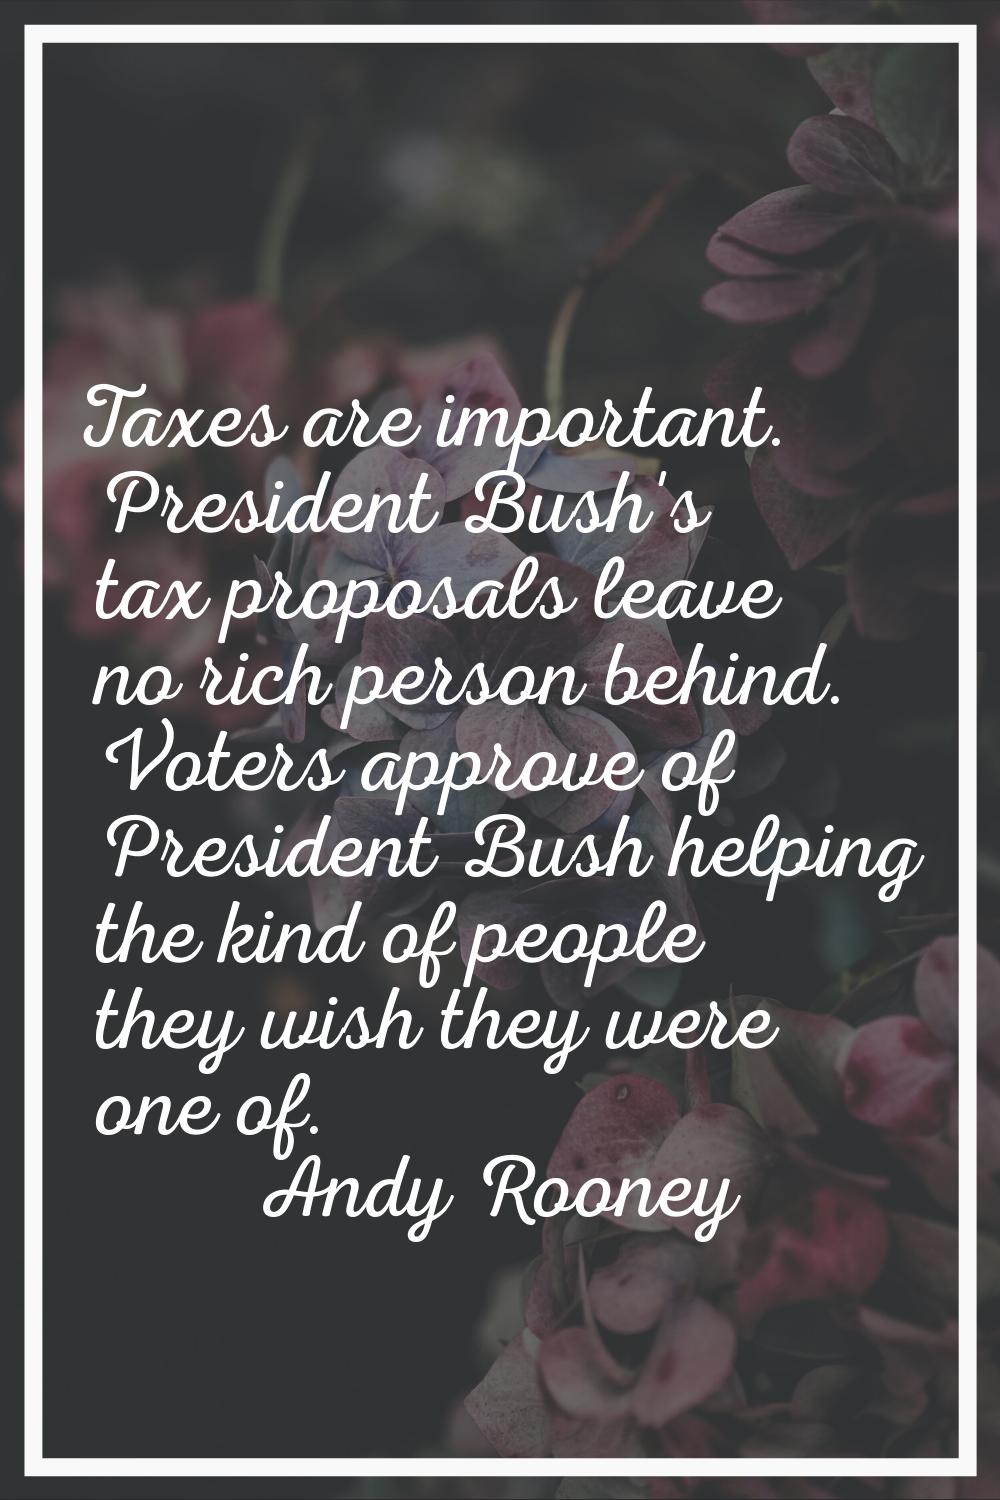 Taxes are important. President Bush's tax proposals leave no rich person behind. Voters approve of 